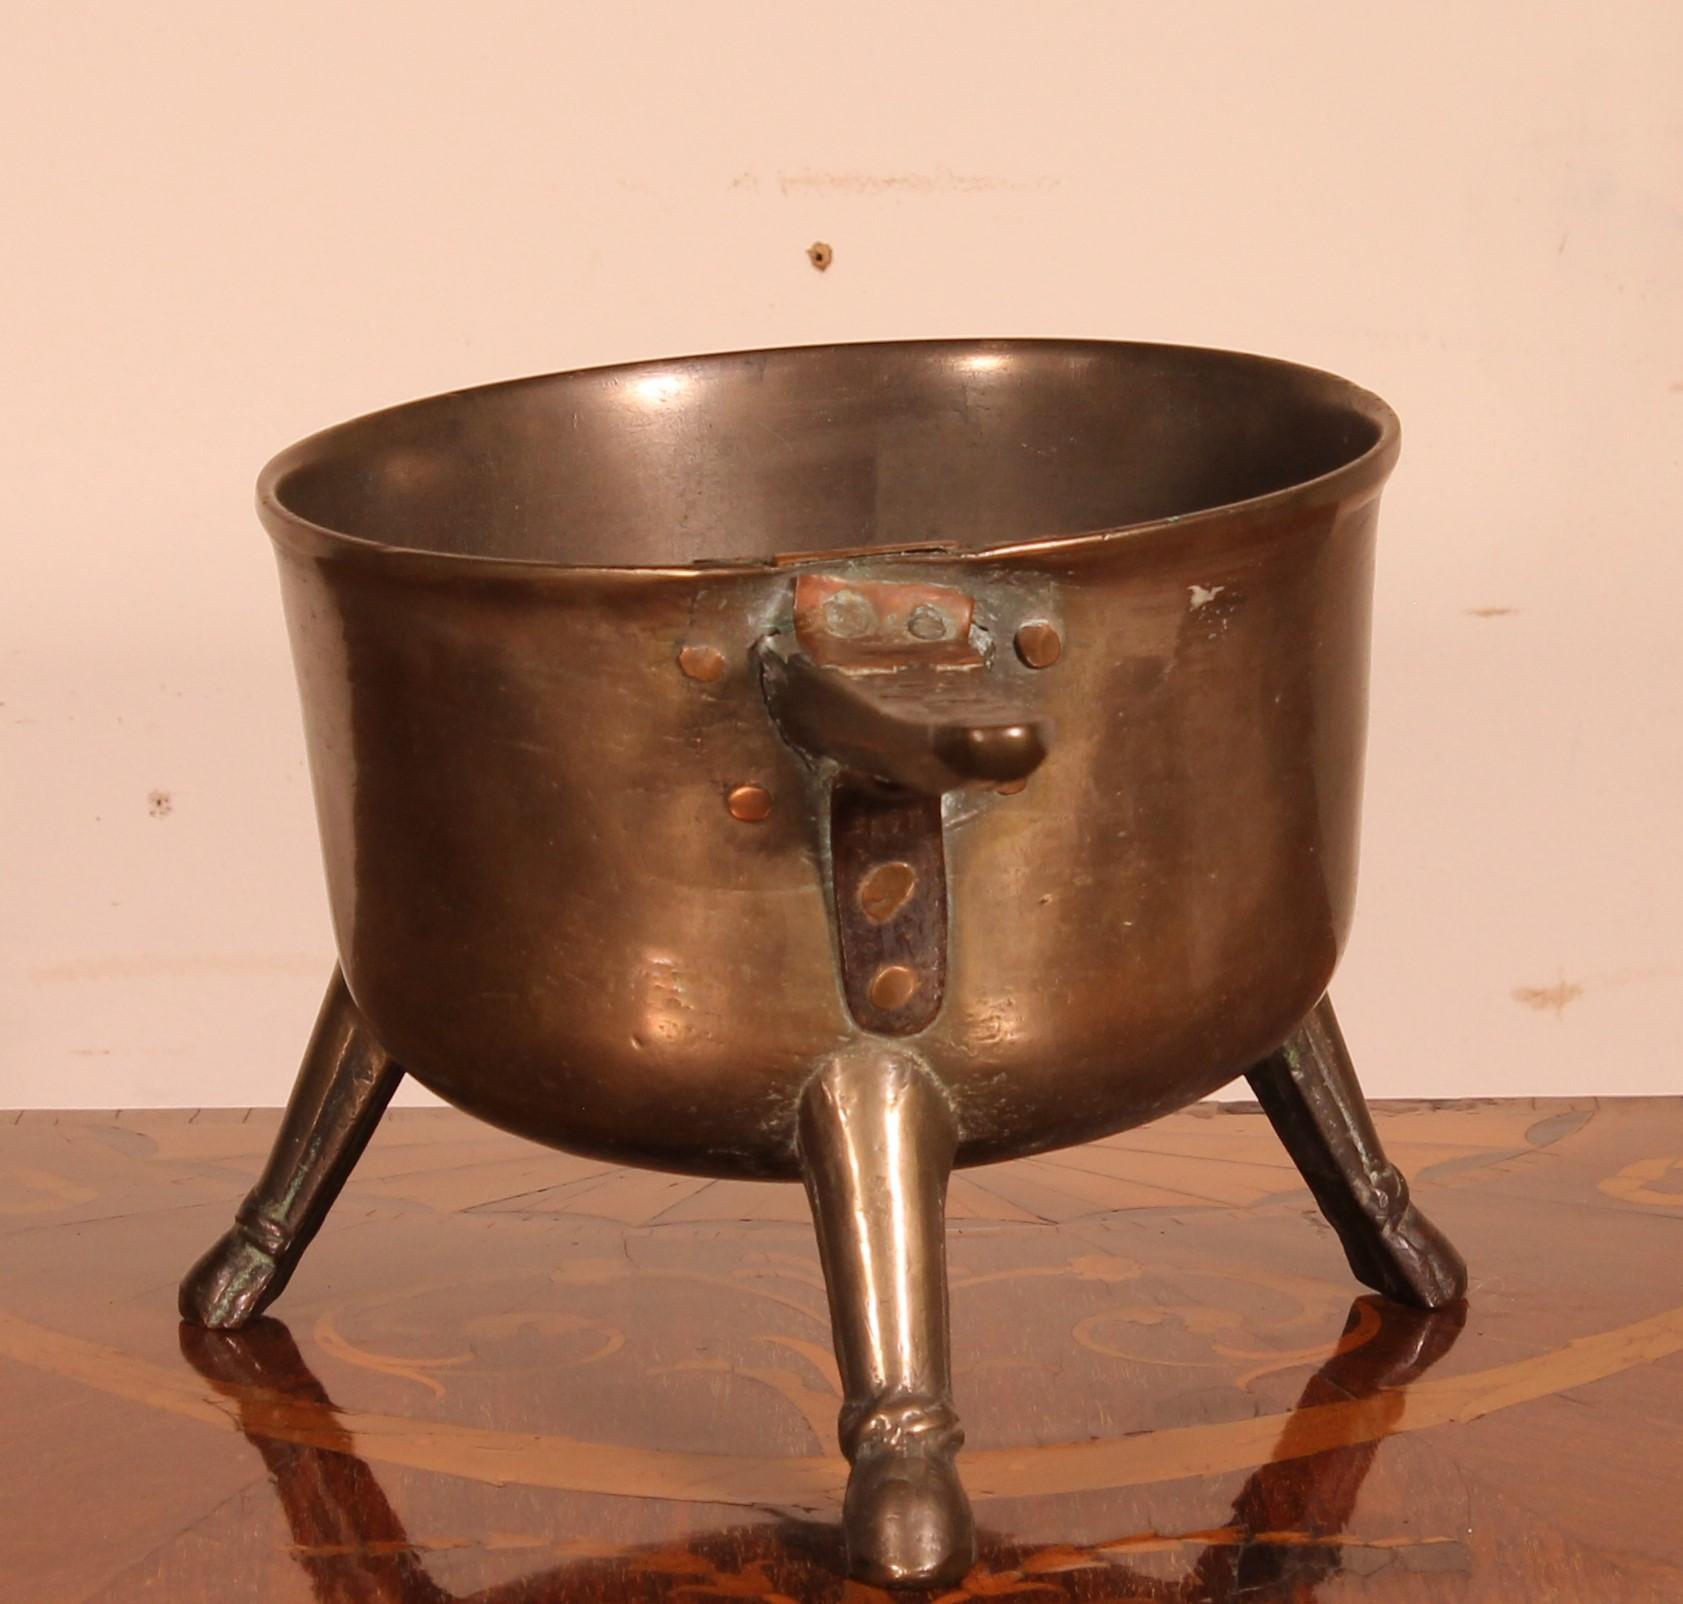 British 17th Century Tripod Apothecary Skillet Dated 1698 from The Ward Rvmens Family For Sale